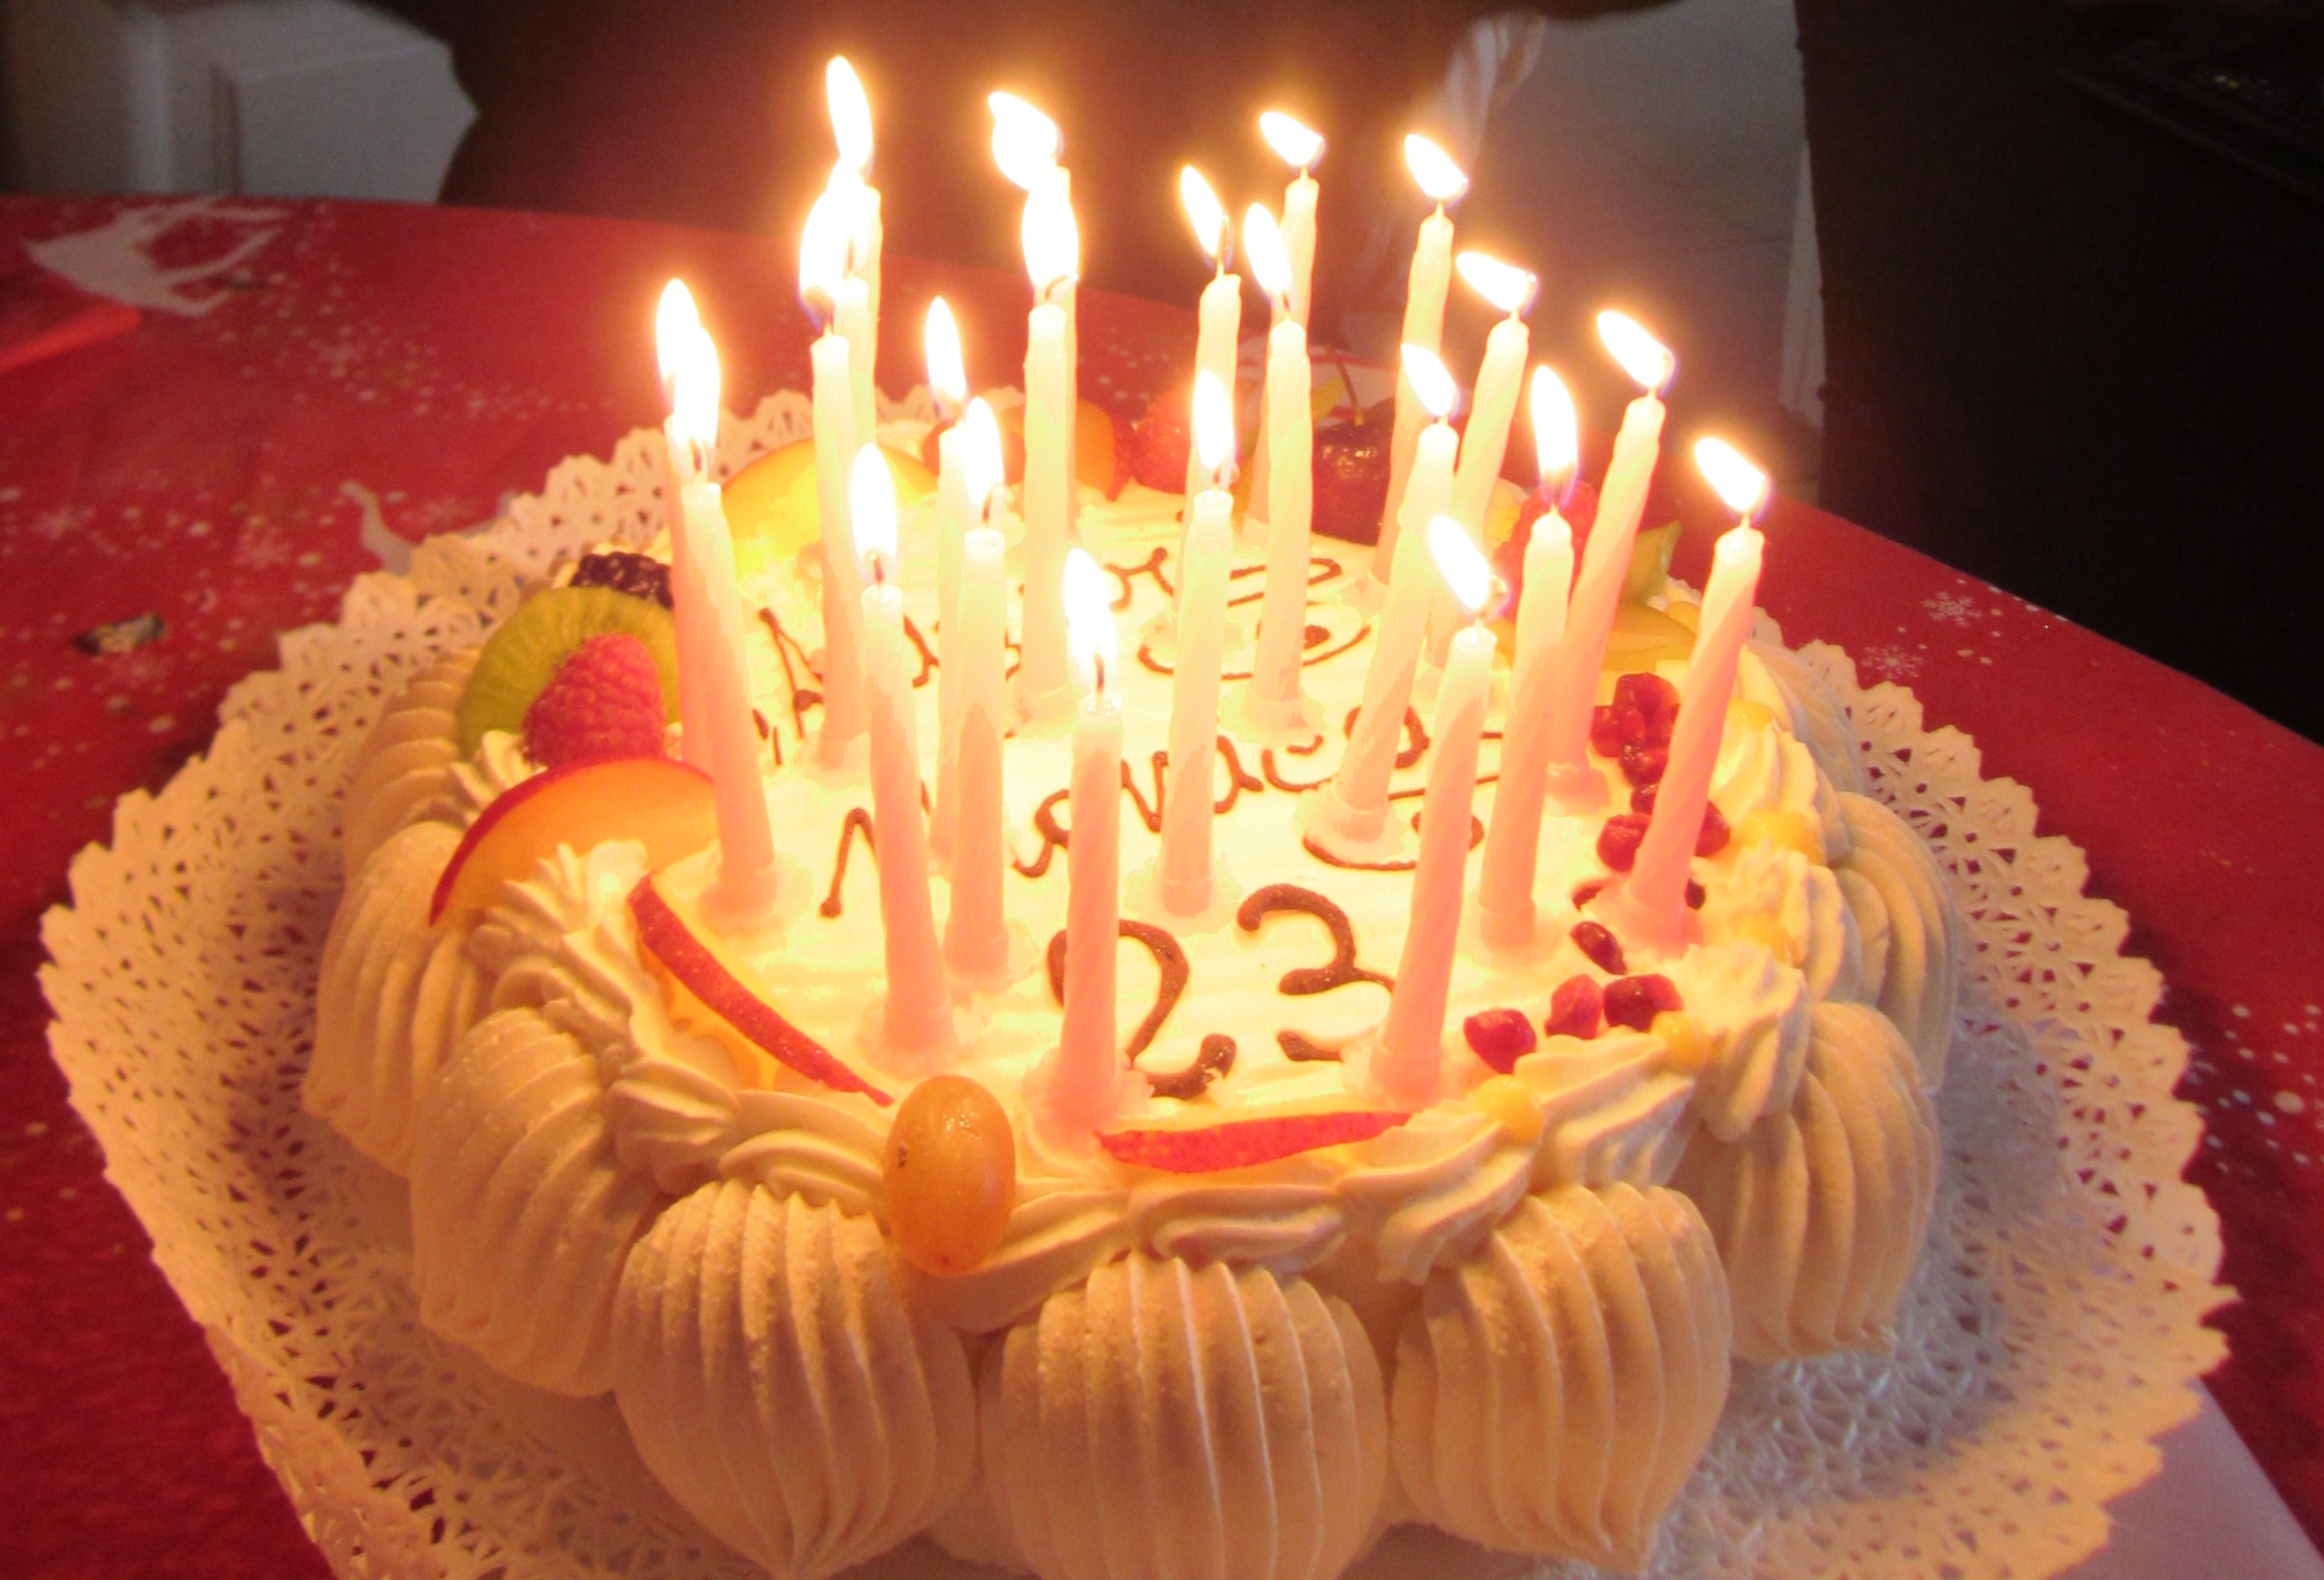 photos of birthday cakes with candles